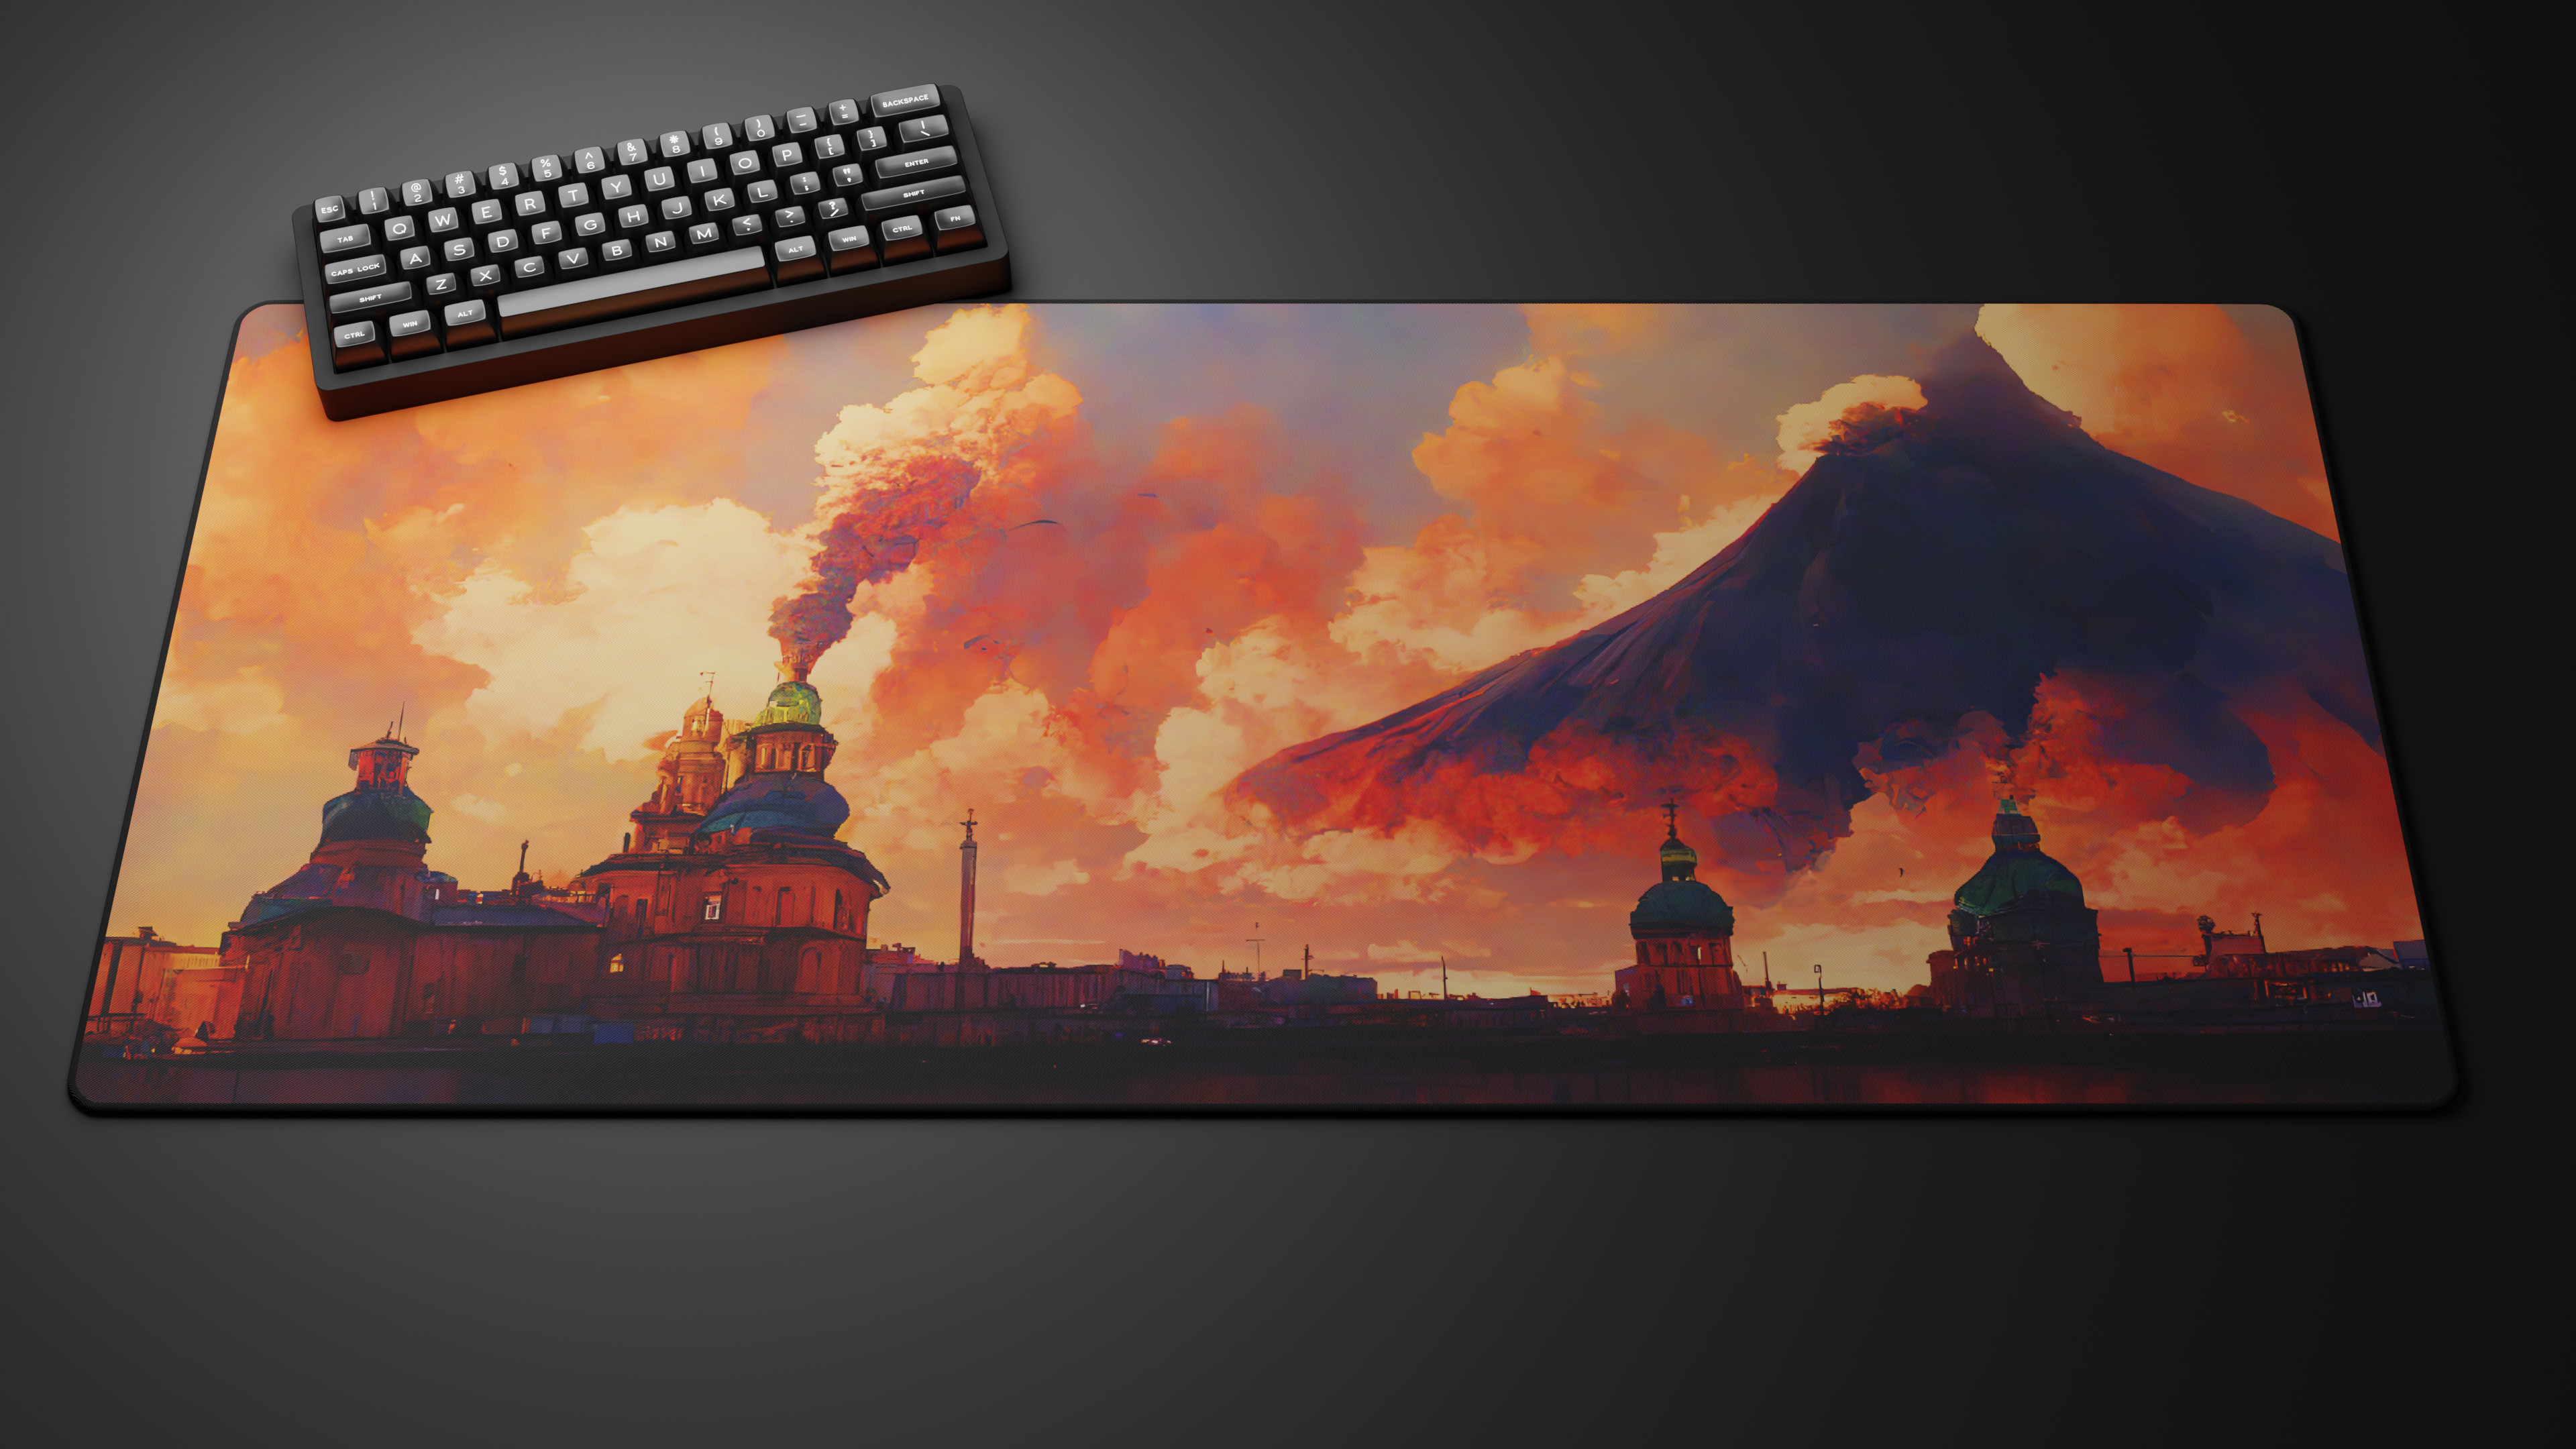 Deskmat 'AI Collection - Volcano' by glutch